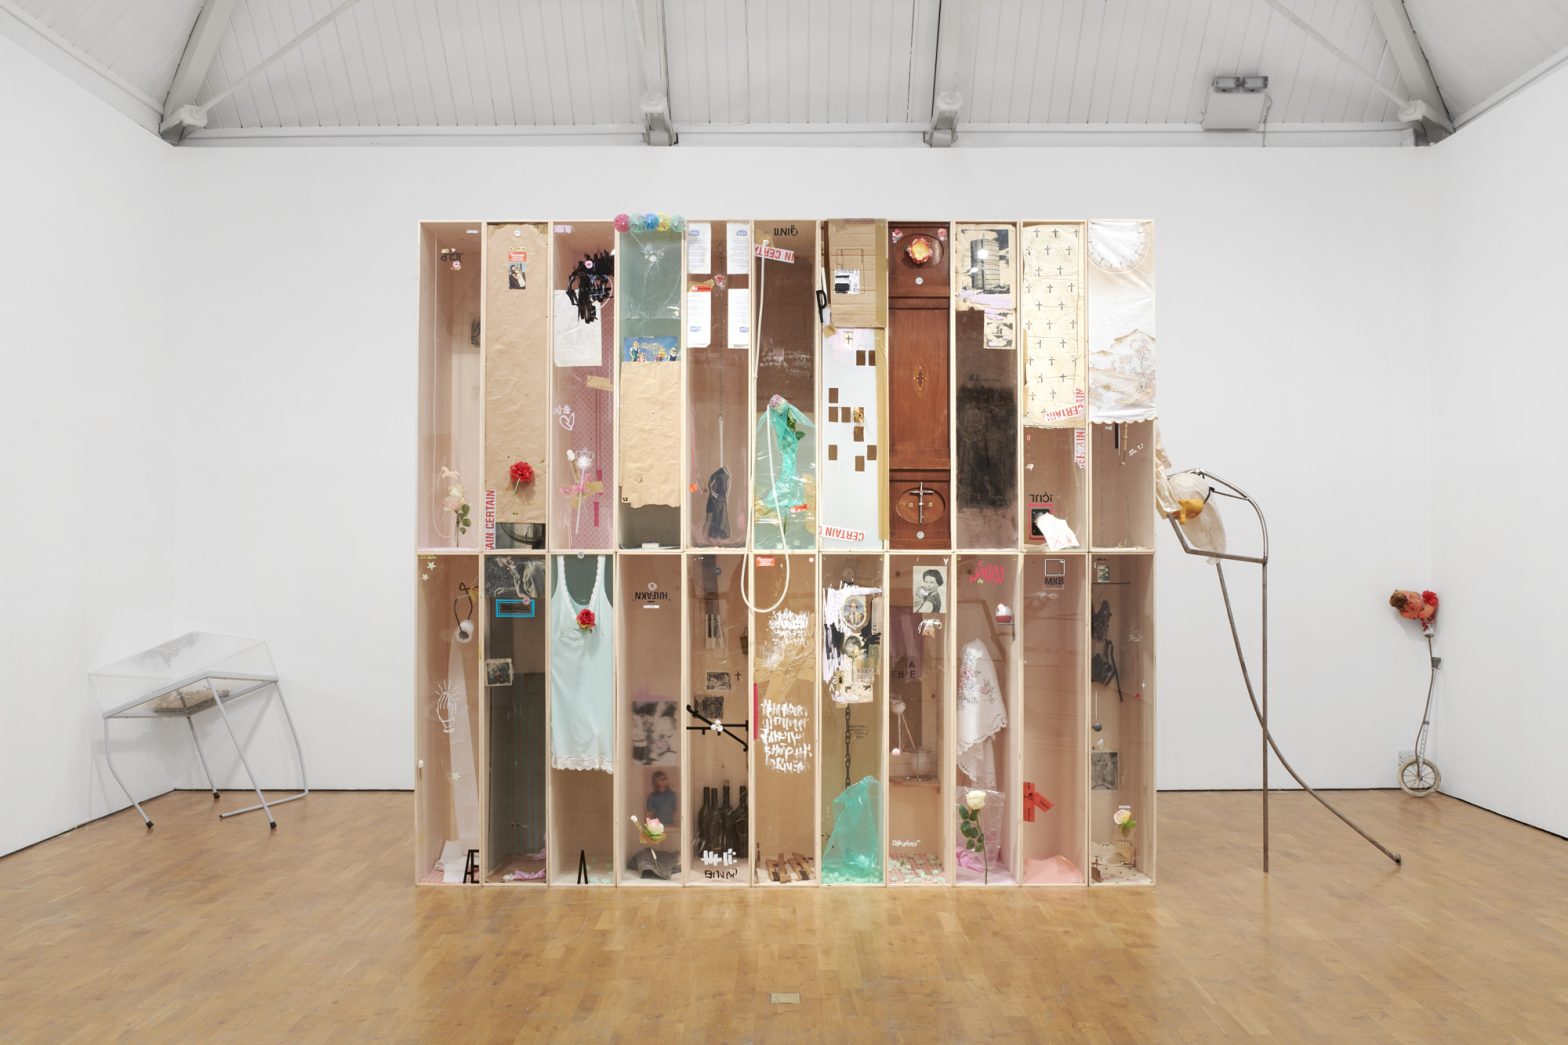 An art installation made up of rows of open wooden boxes filled with a variety of objects, images, clothes and jewellery. On either side of the sculpture are artworks made of metal rods and wheels.